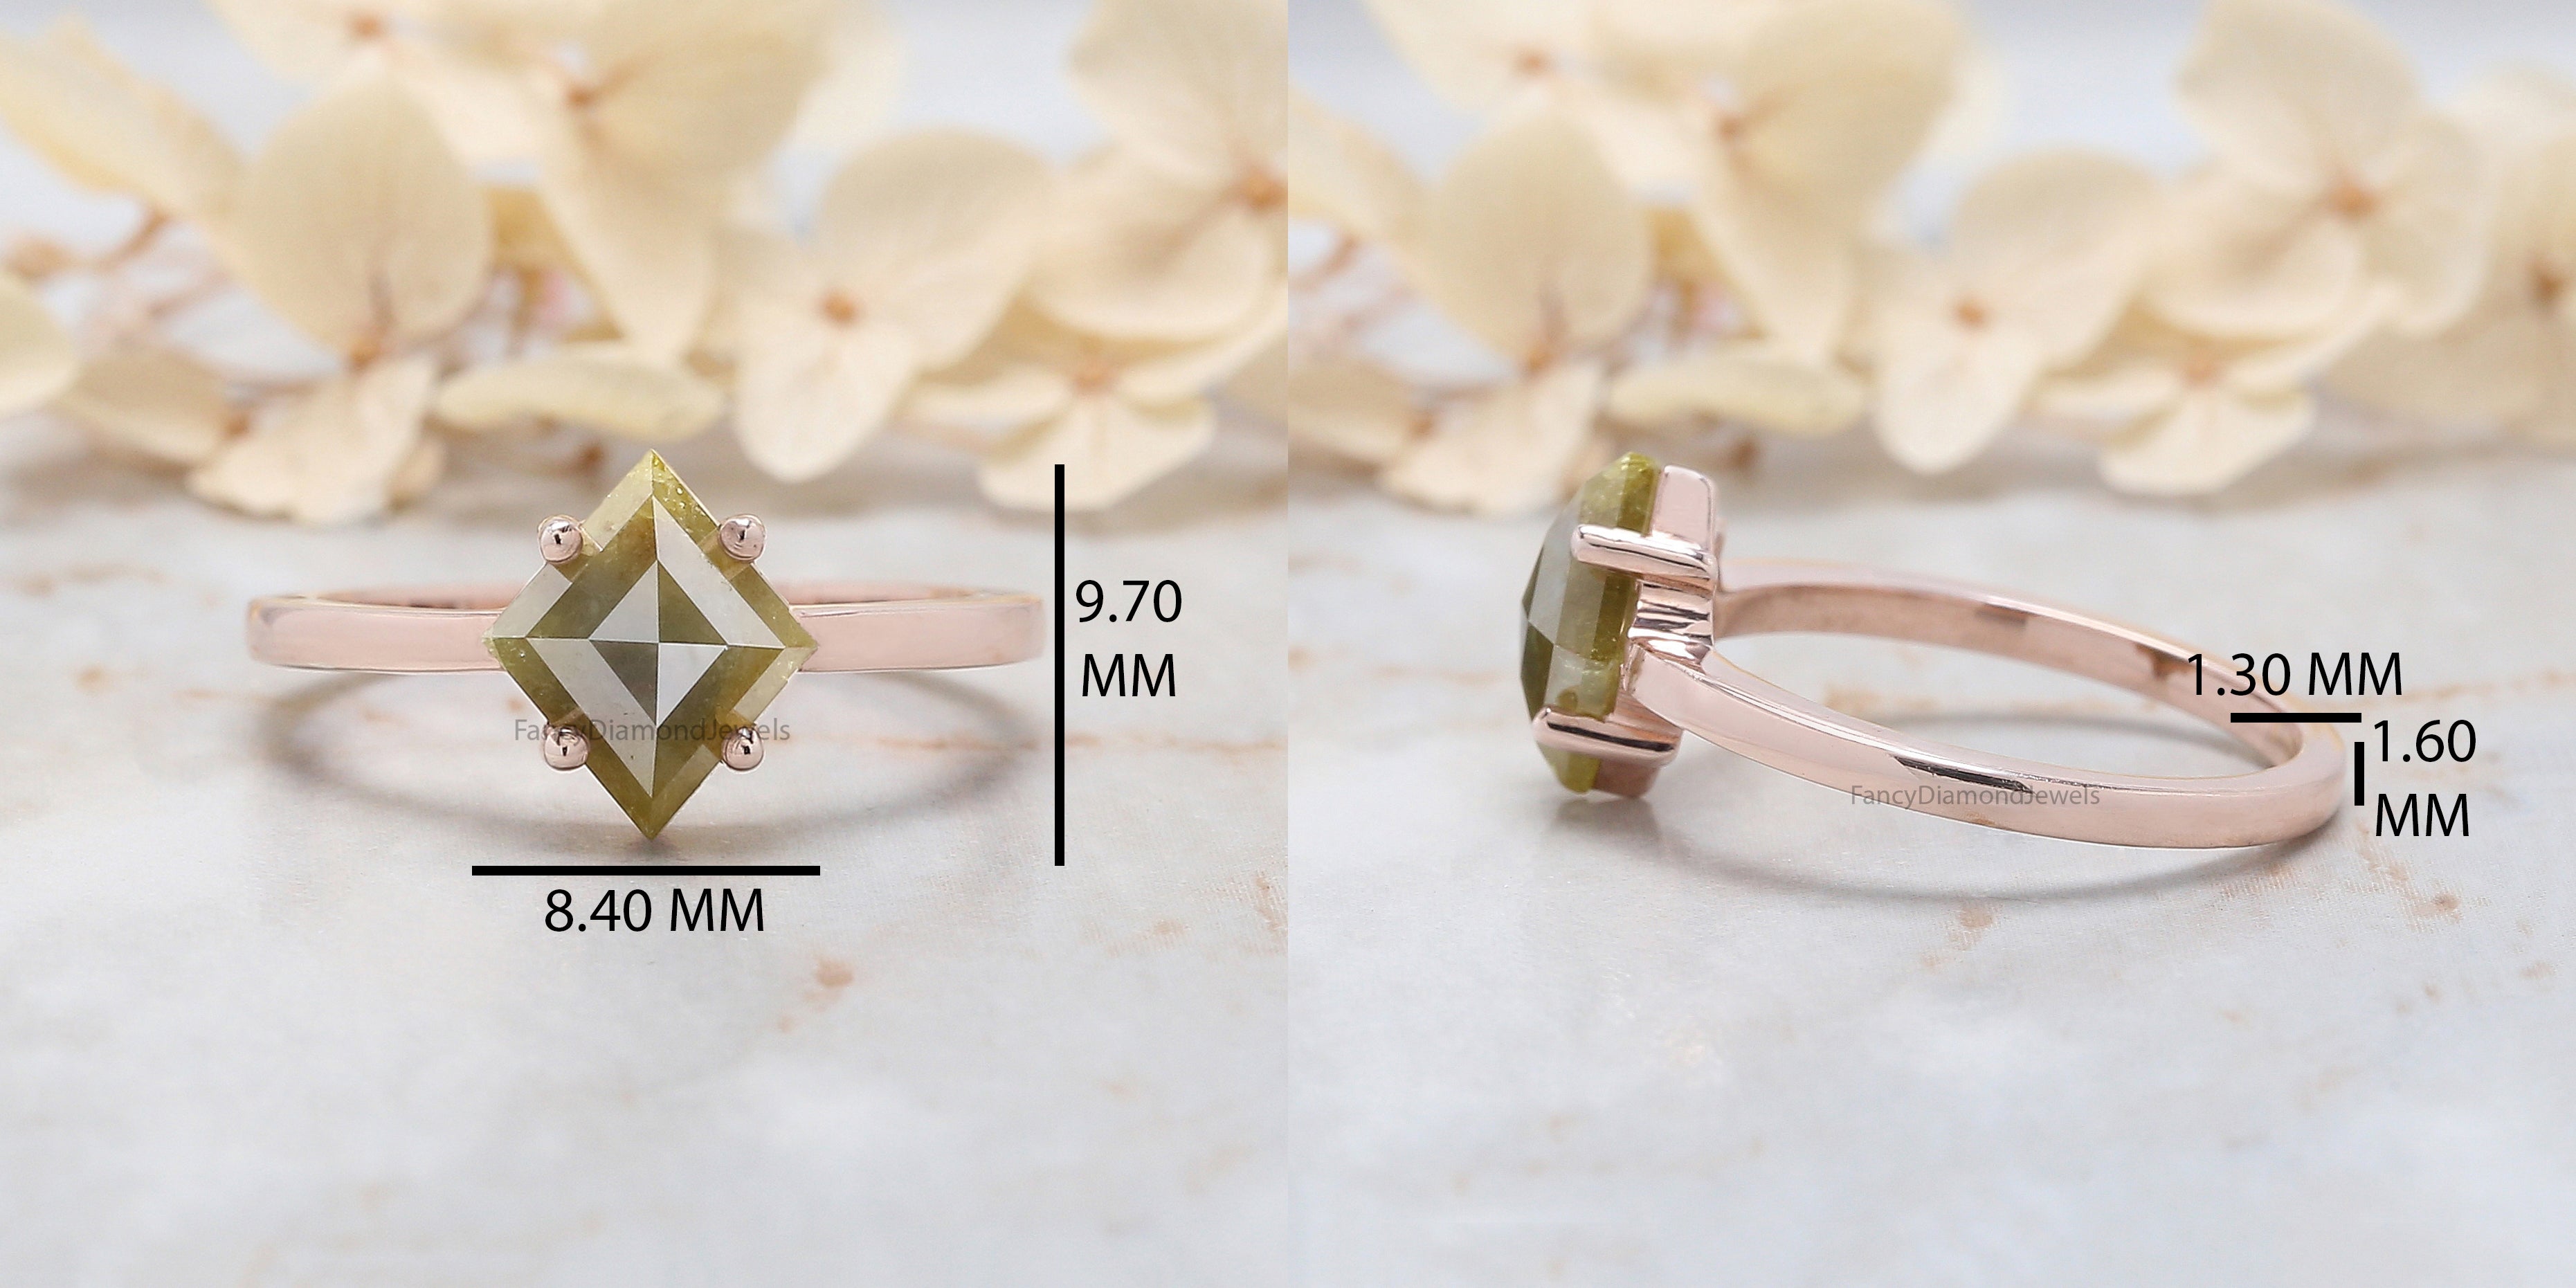 Kite Cut Yellow Color Diamond Ring 1.61 Ct 9.60 MM Kite Shape Diamond Ring 14K Solid Rose Gold Silver Kite Engagement Ring Gift For Her QL8814